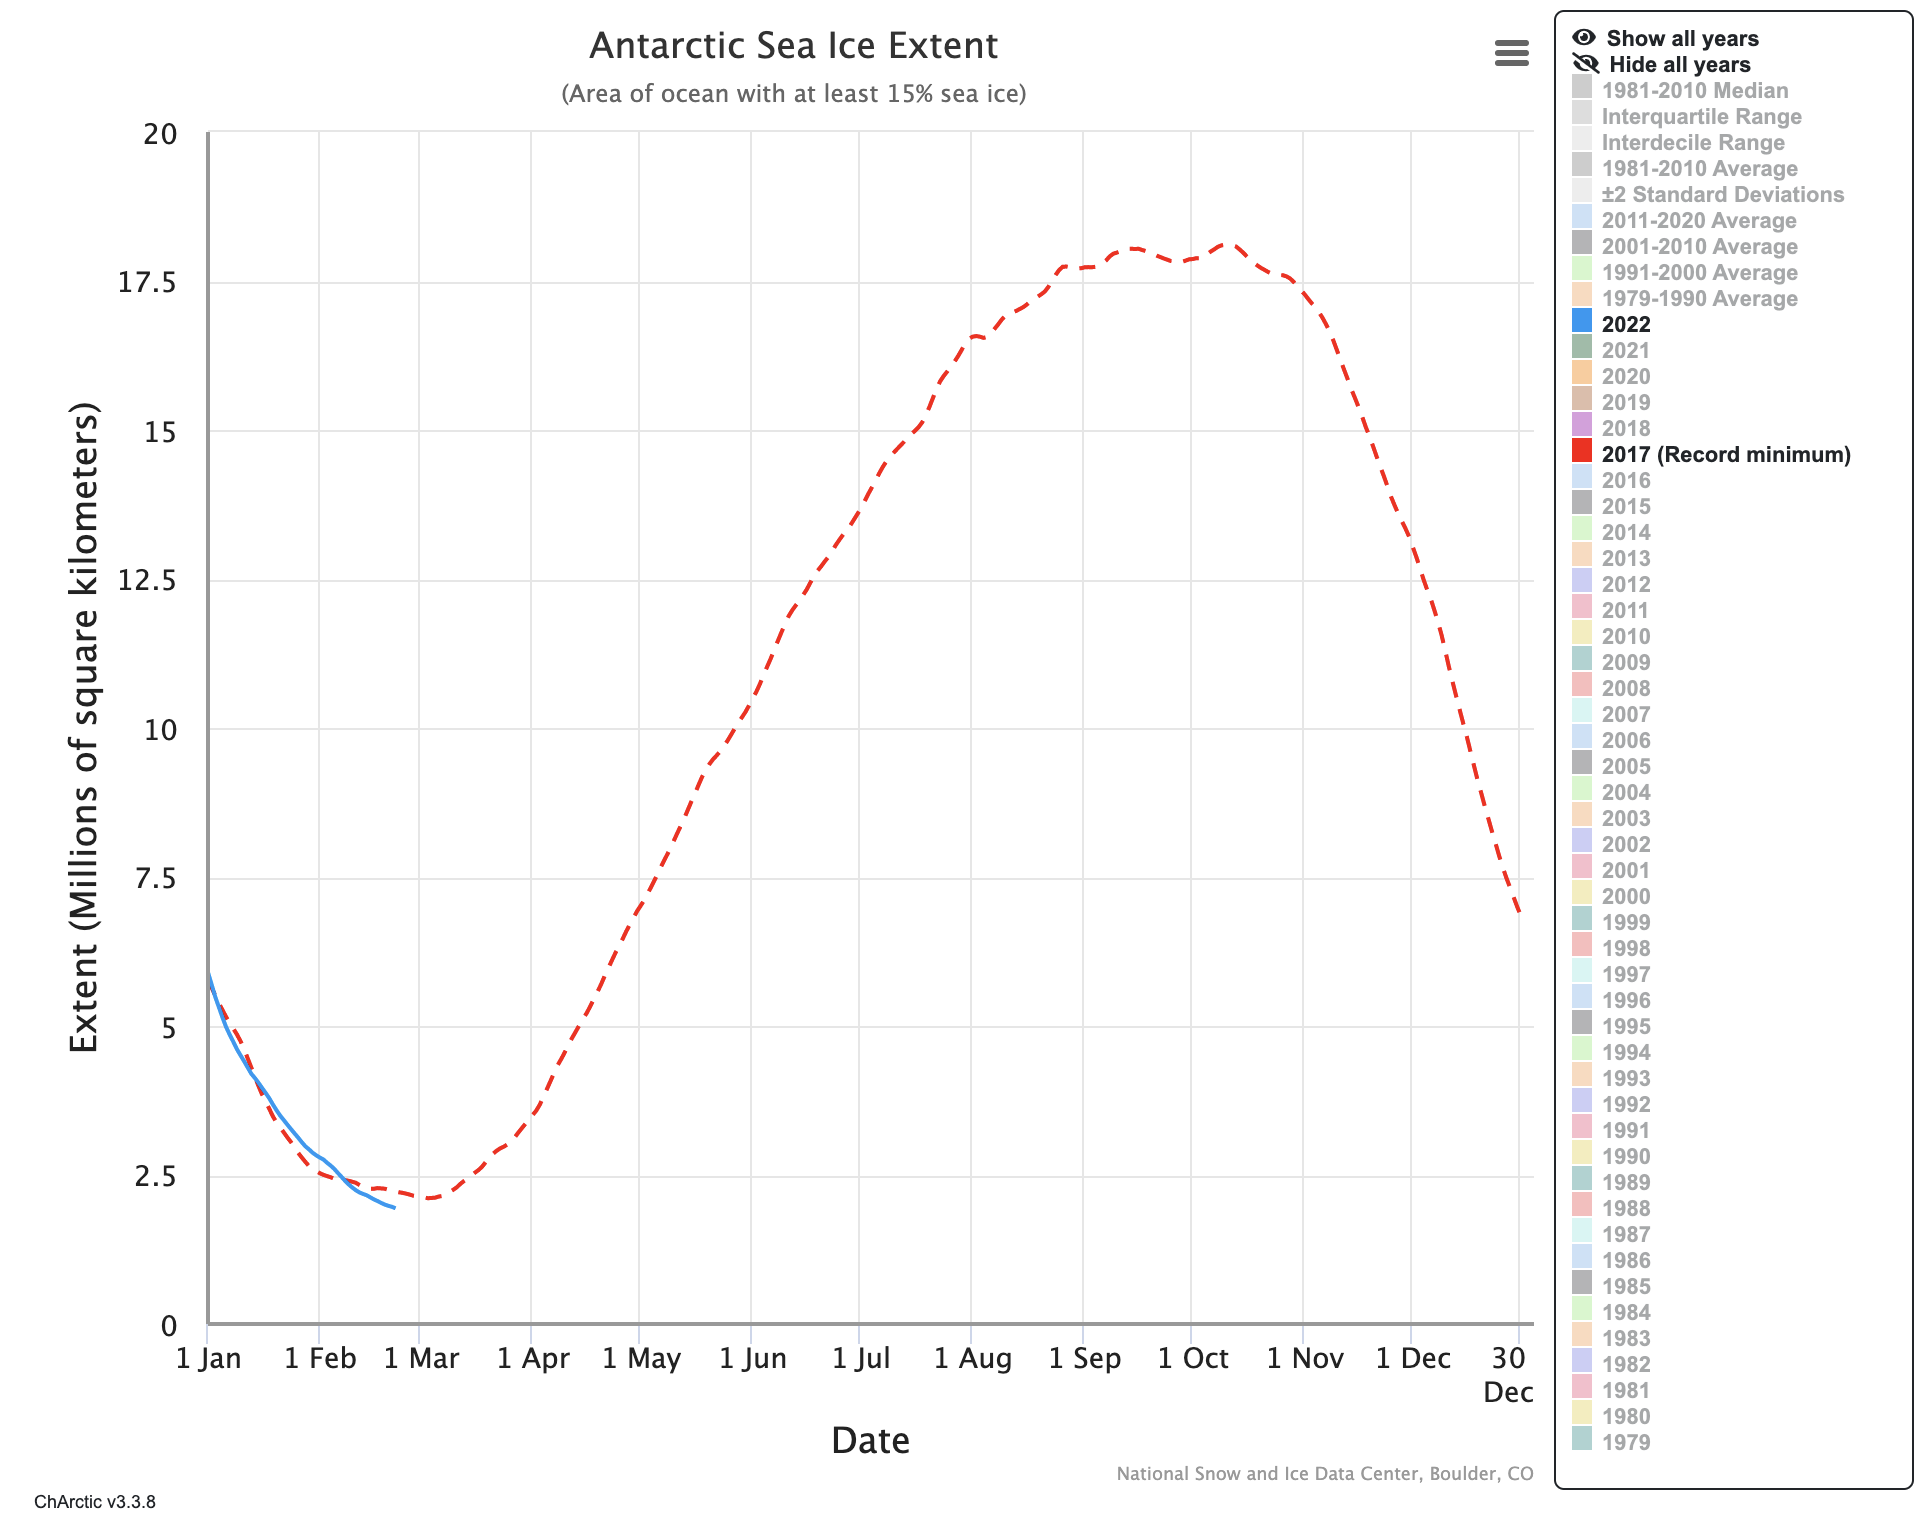 Antarctic Sea Ice Hits Lowest Level Since 1970s